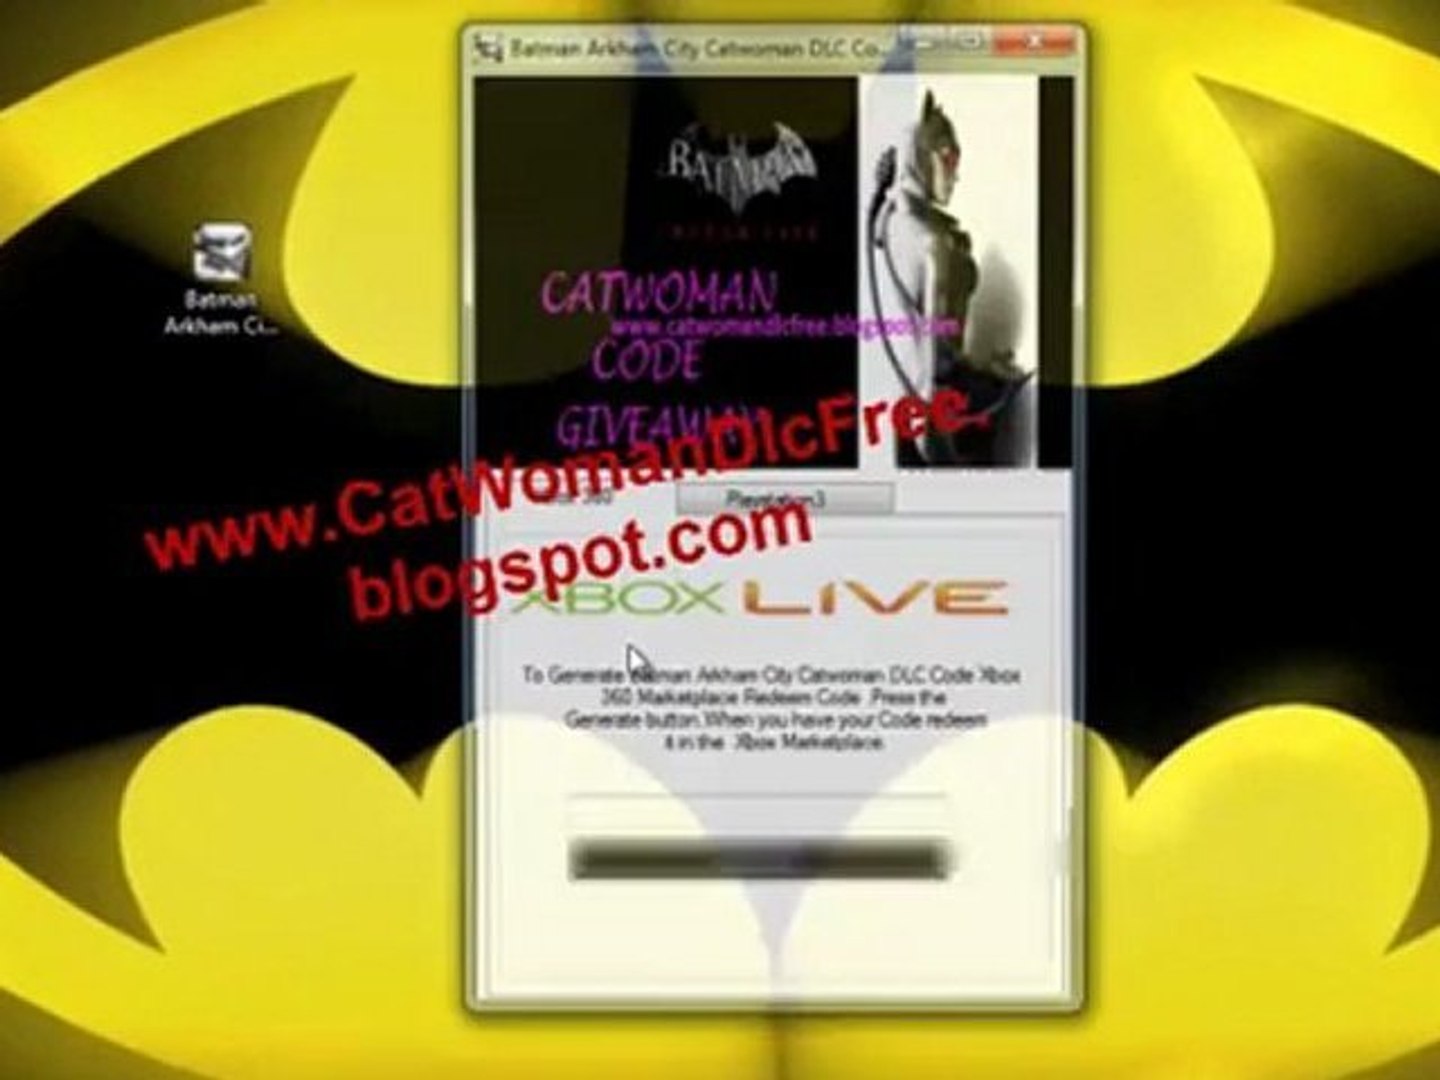 Batman Arkham City Catwoman Character Pack DLC Codes - Free!! - video  Dailymotion